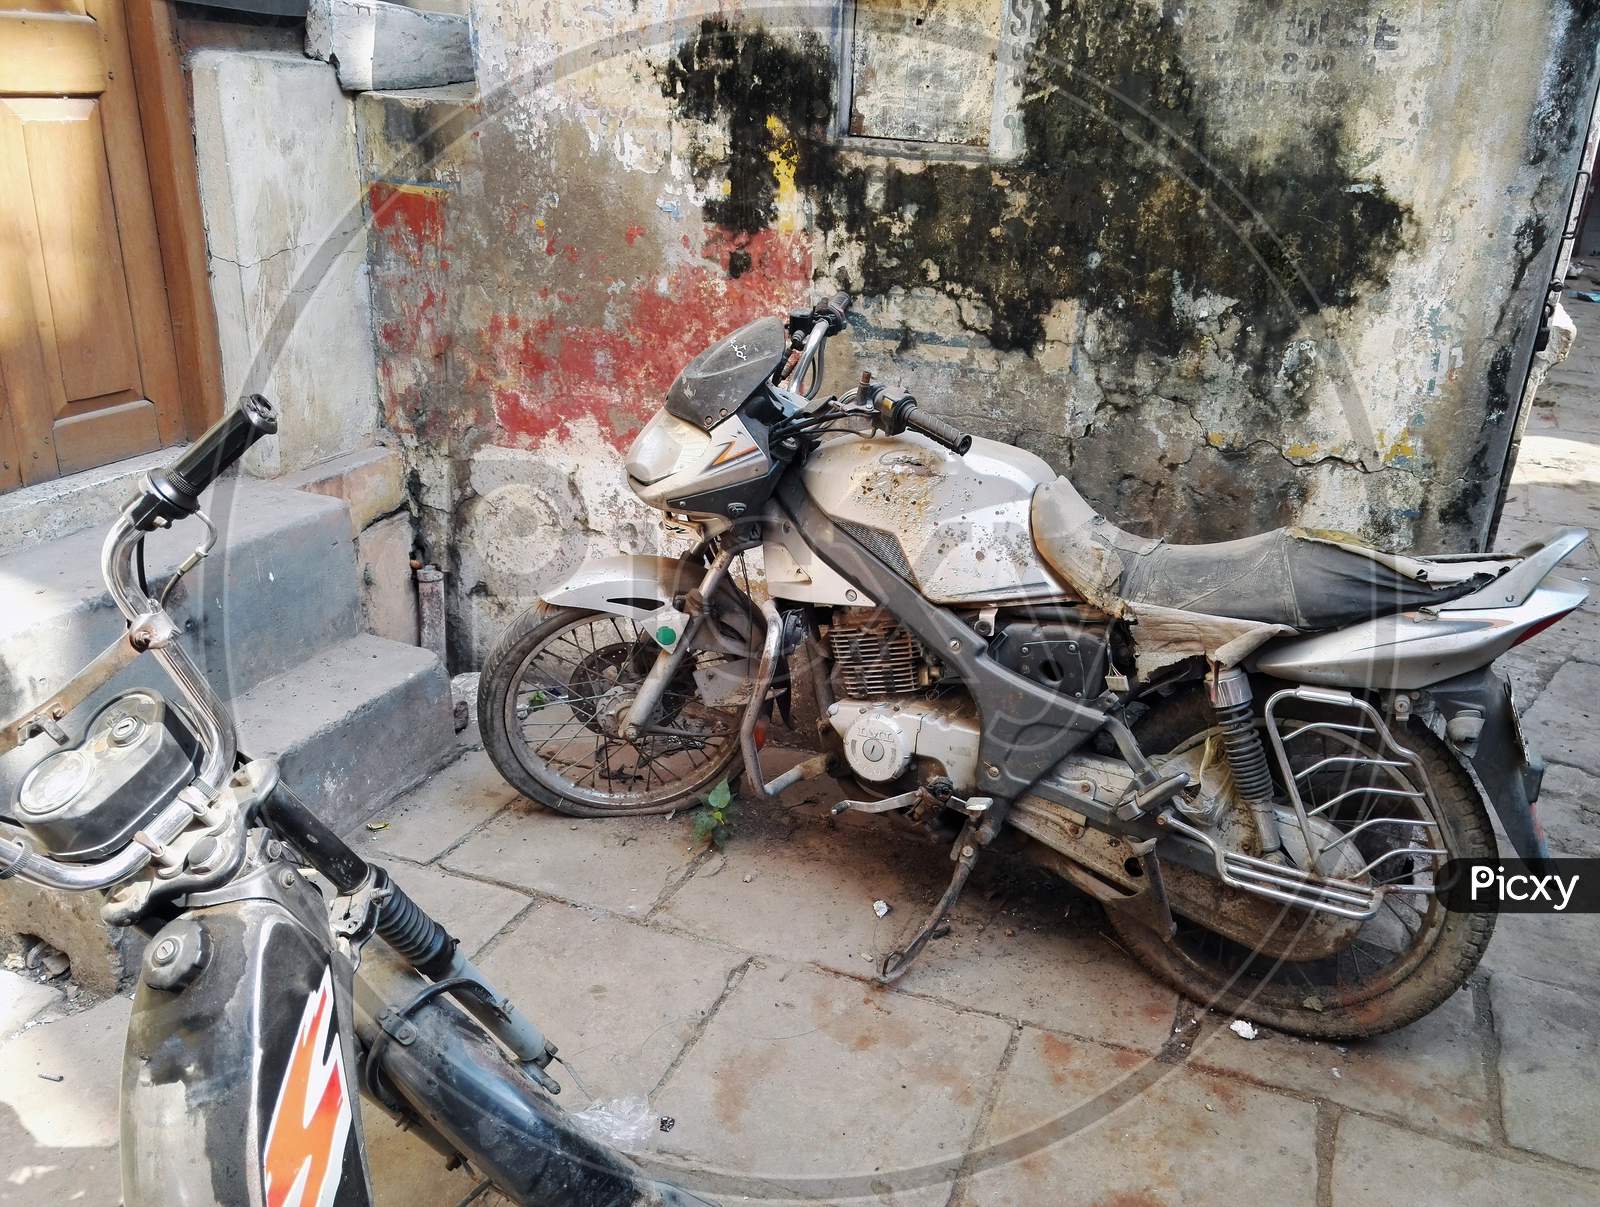 Varanasi, India - November 01, 2016: An Old Rusty Damaged And Flat Tired Indian Motor Bike Parked In A Grungy Corner Of An Alley In The Old City, Uttar Pradesh